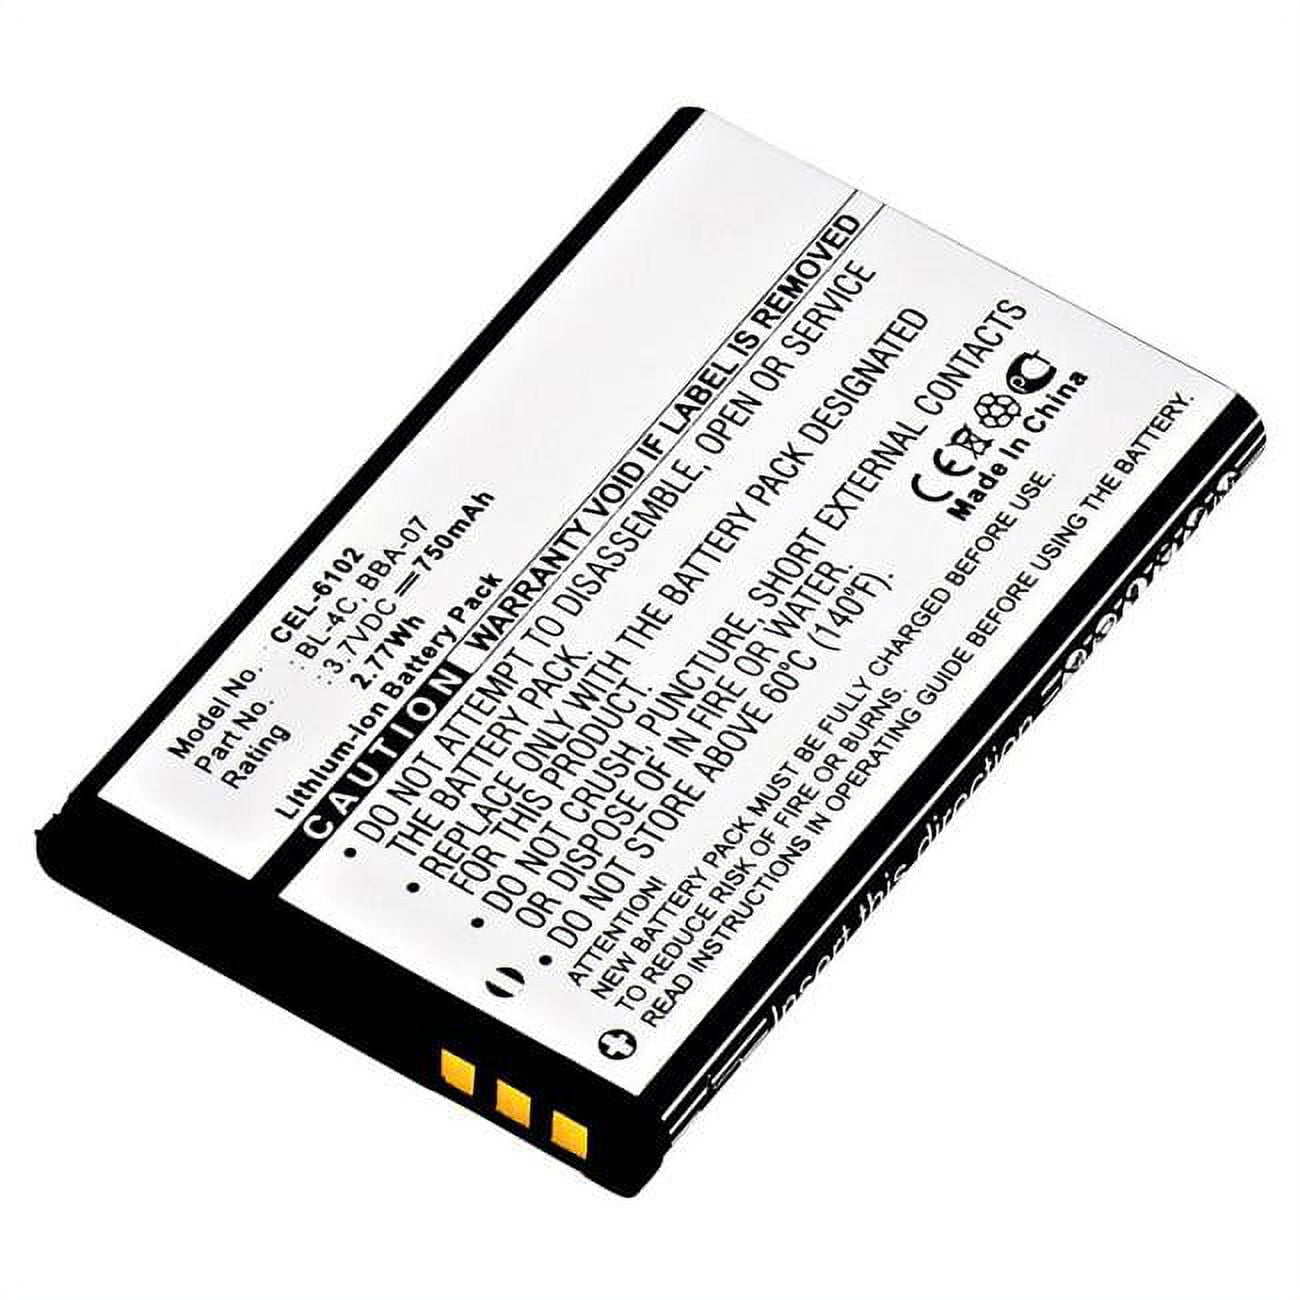 Picture of Ultralast CEL-6102 3.7V & 750 mAh Replacement Lithium-Ion Battery for Nokia 1000 Cellular Phone